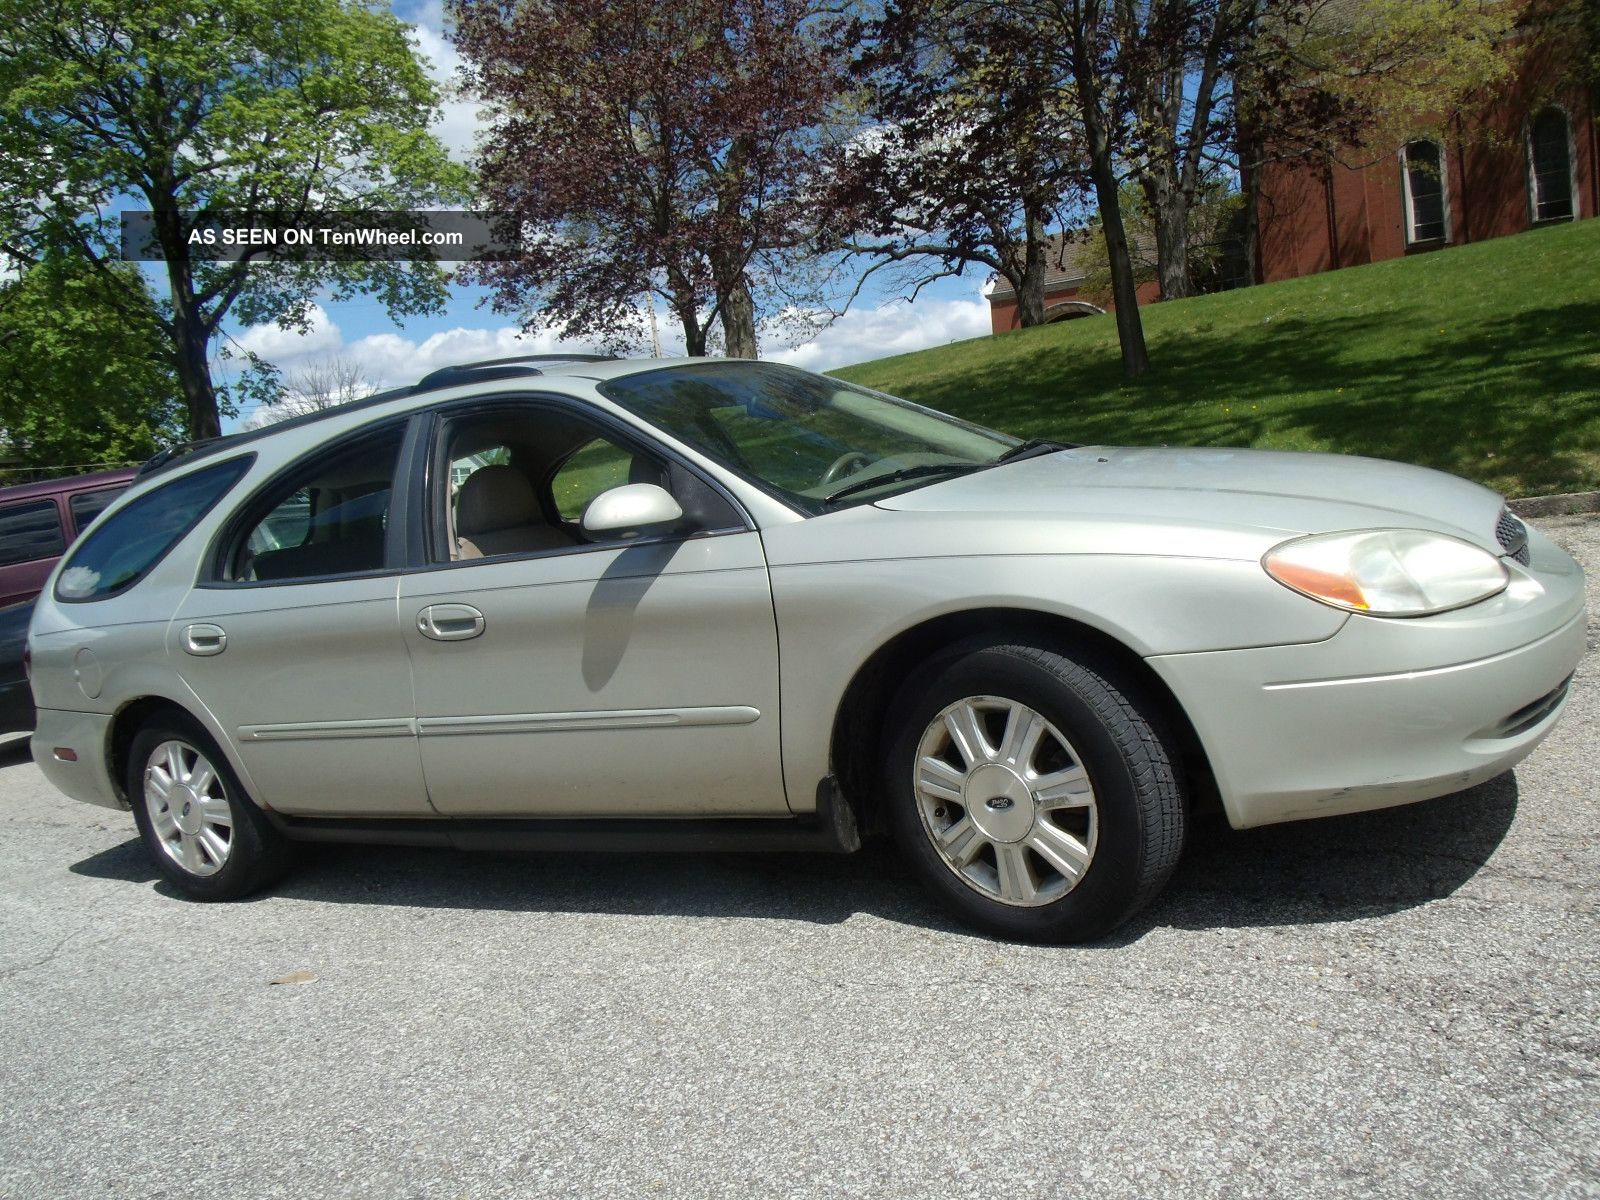 2003 Ford taurus se wagon review #2